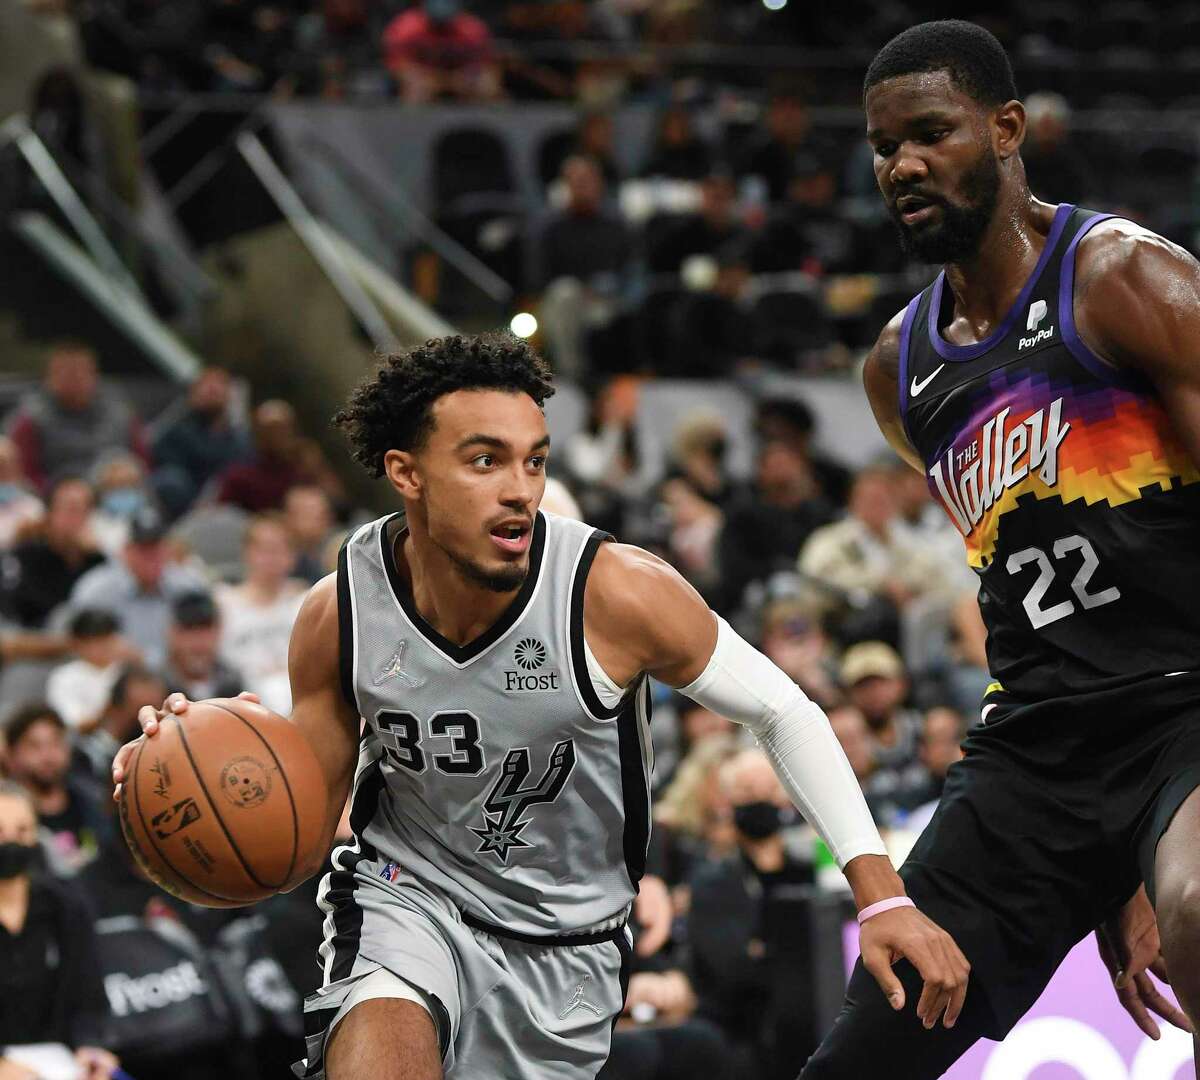 Tre Jones (33) of San Antonio Spurs drives by Deandre Ayton of the Phoenix Suns during second-half NBA action in the AT&T Center on Monday, Nov. 22, 2021.